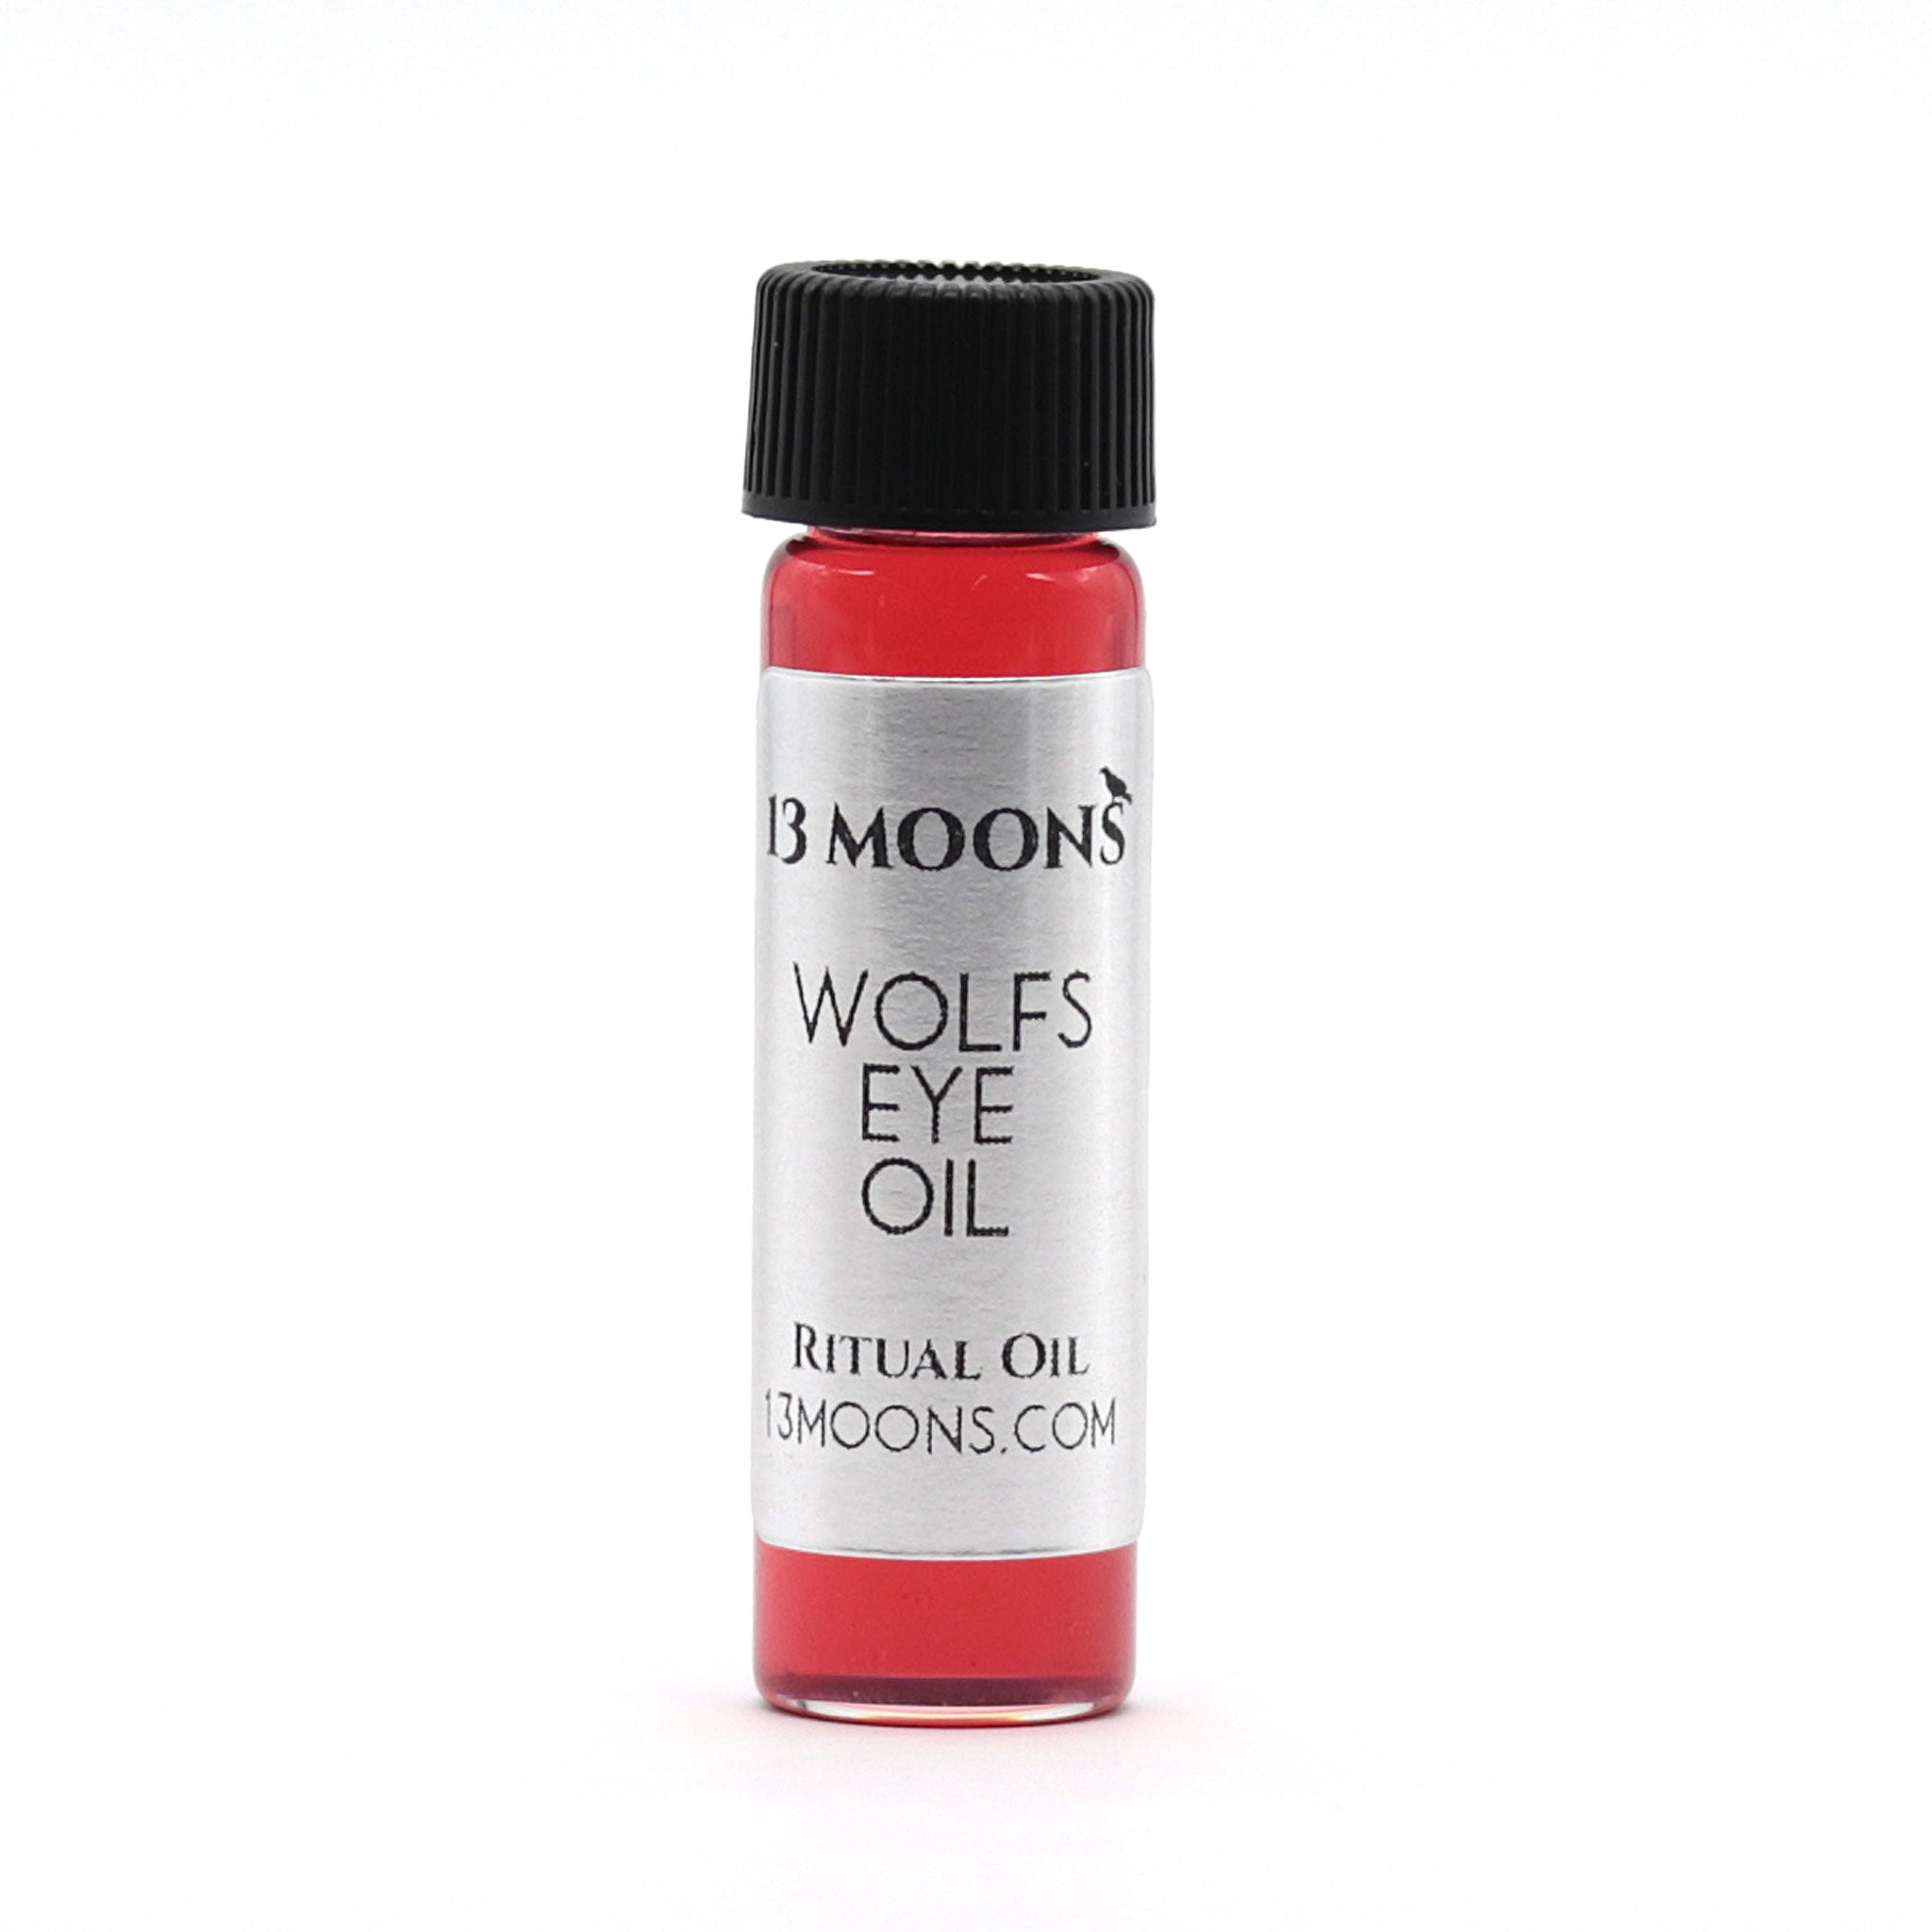 Wolfs Eye Oil by 13 Moons - 13 Moons